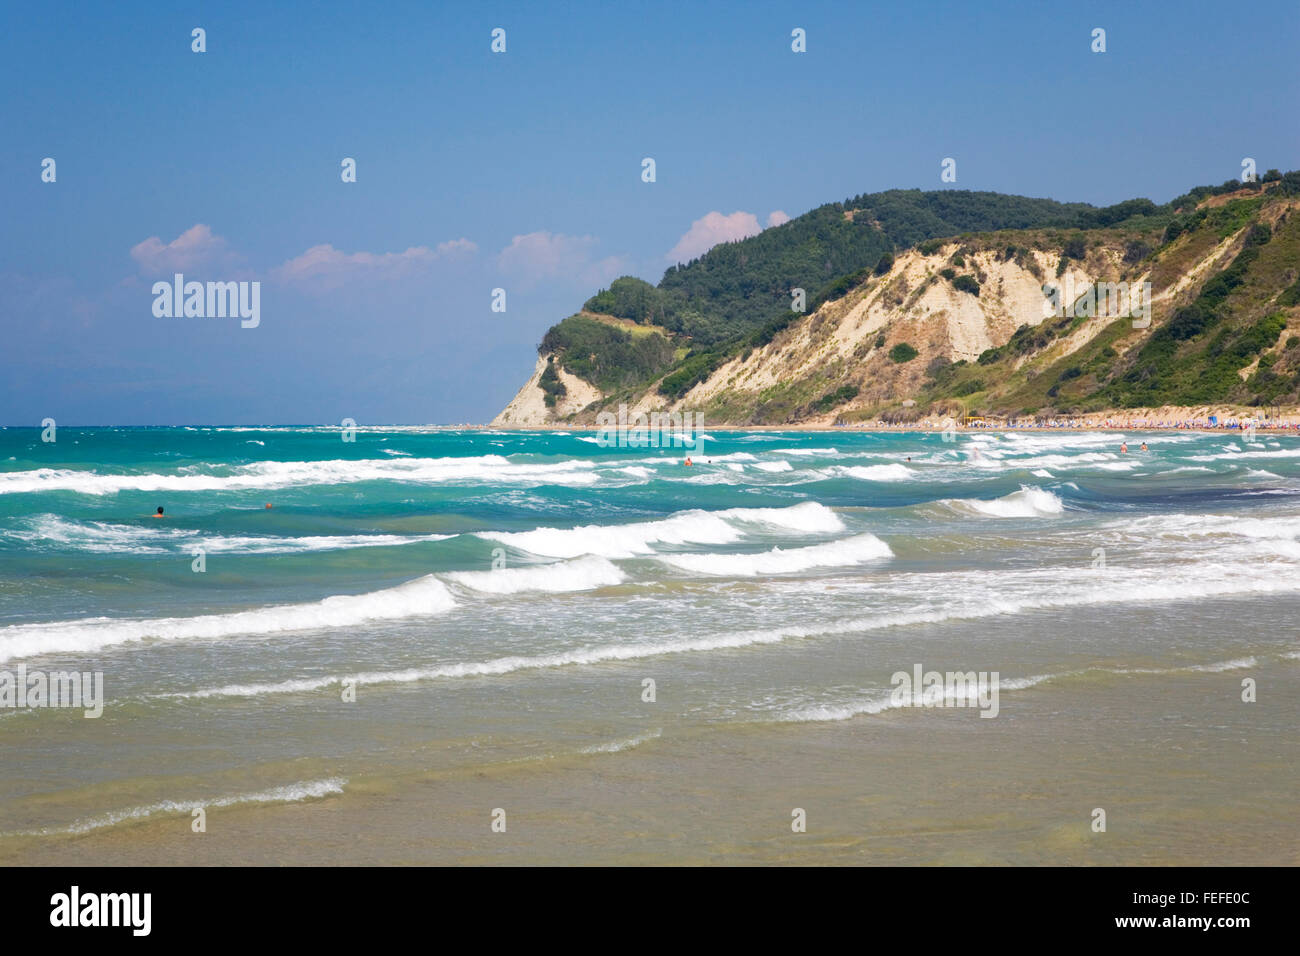 Agios Stefanos (west), Corfu, Ionian Islands, Greece. View across rough turquoise sea, waves rolling in. Stock Photo